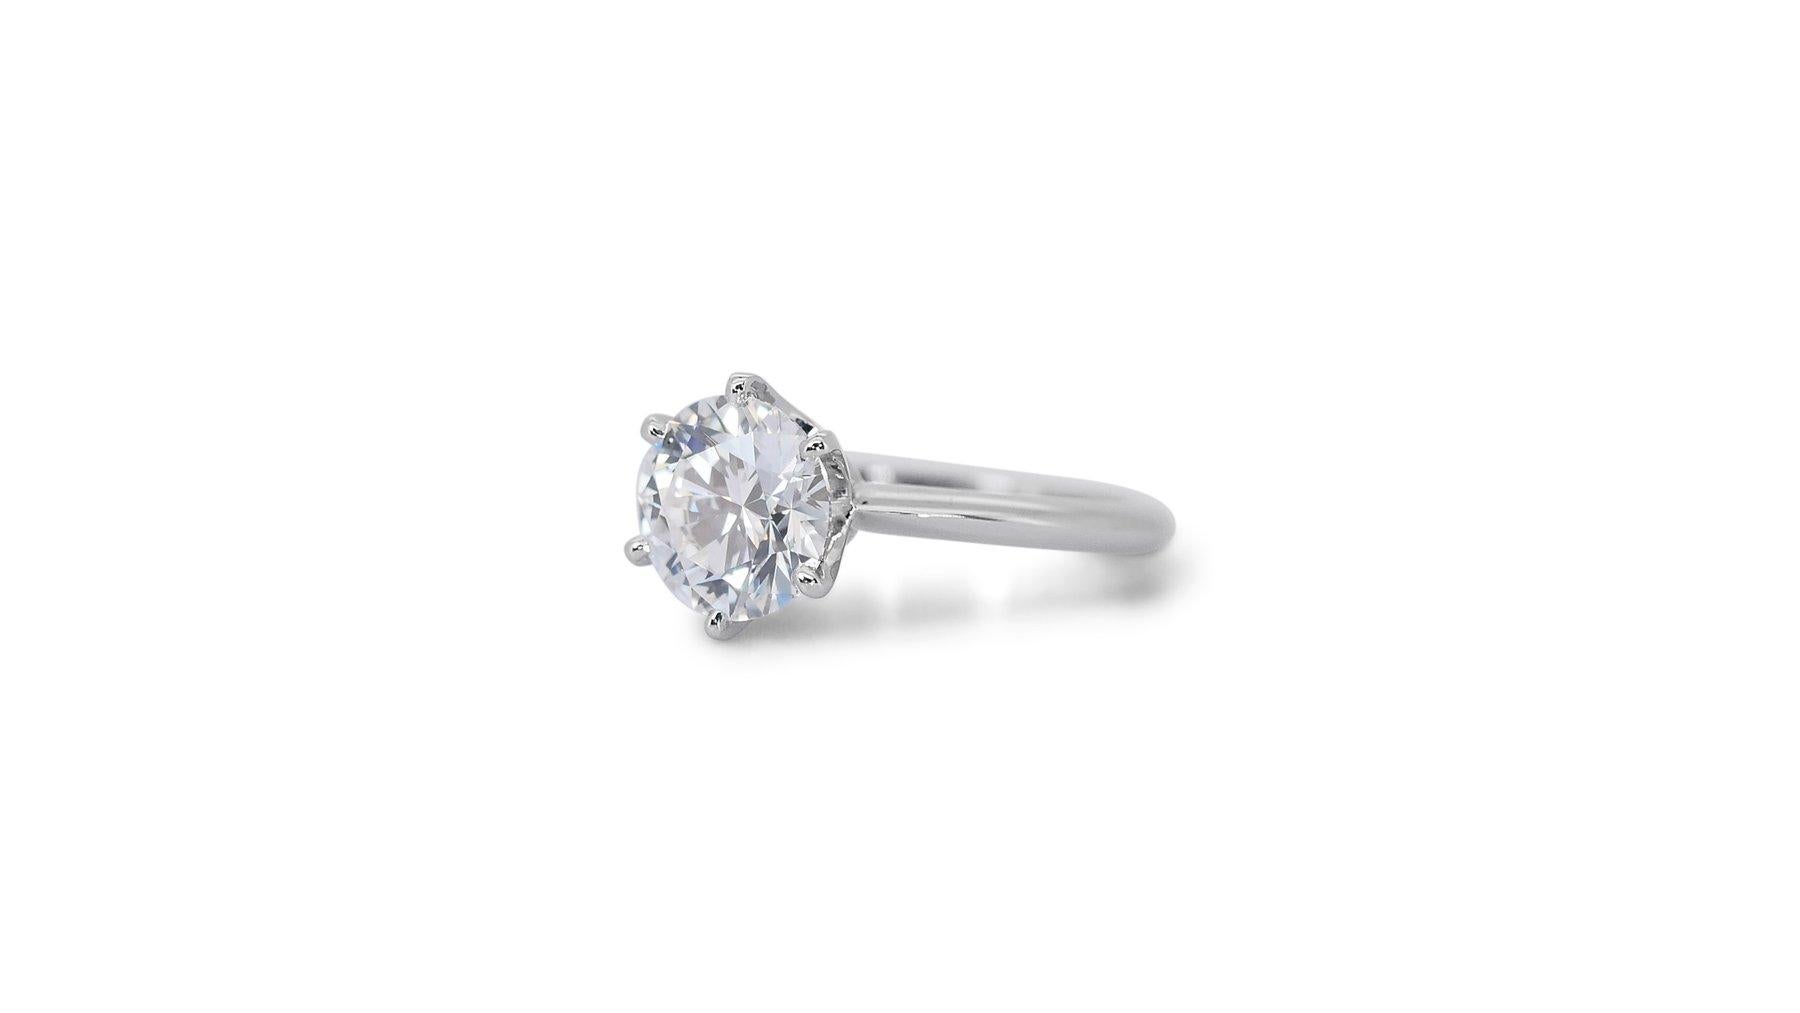 Stunning 18k White Gold 3.00 Carat Round Brilliant Diamond Solitaire Ring For Sale 2